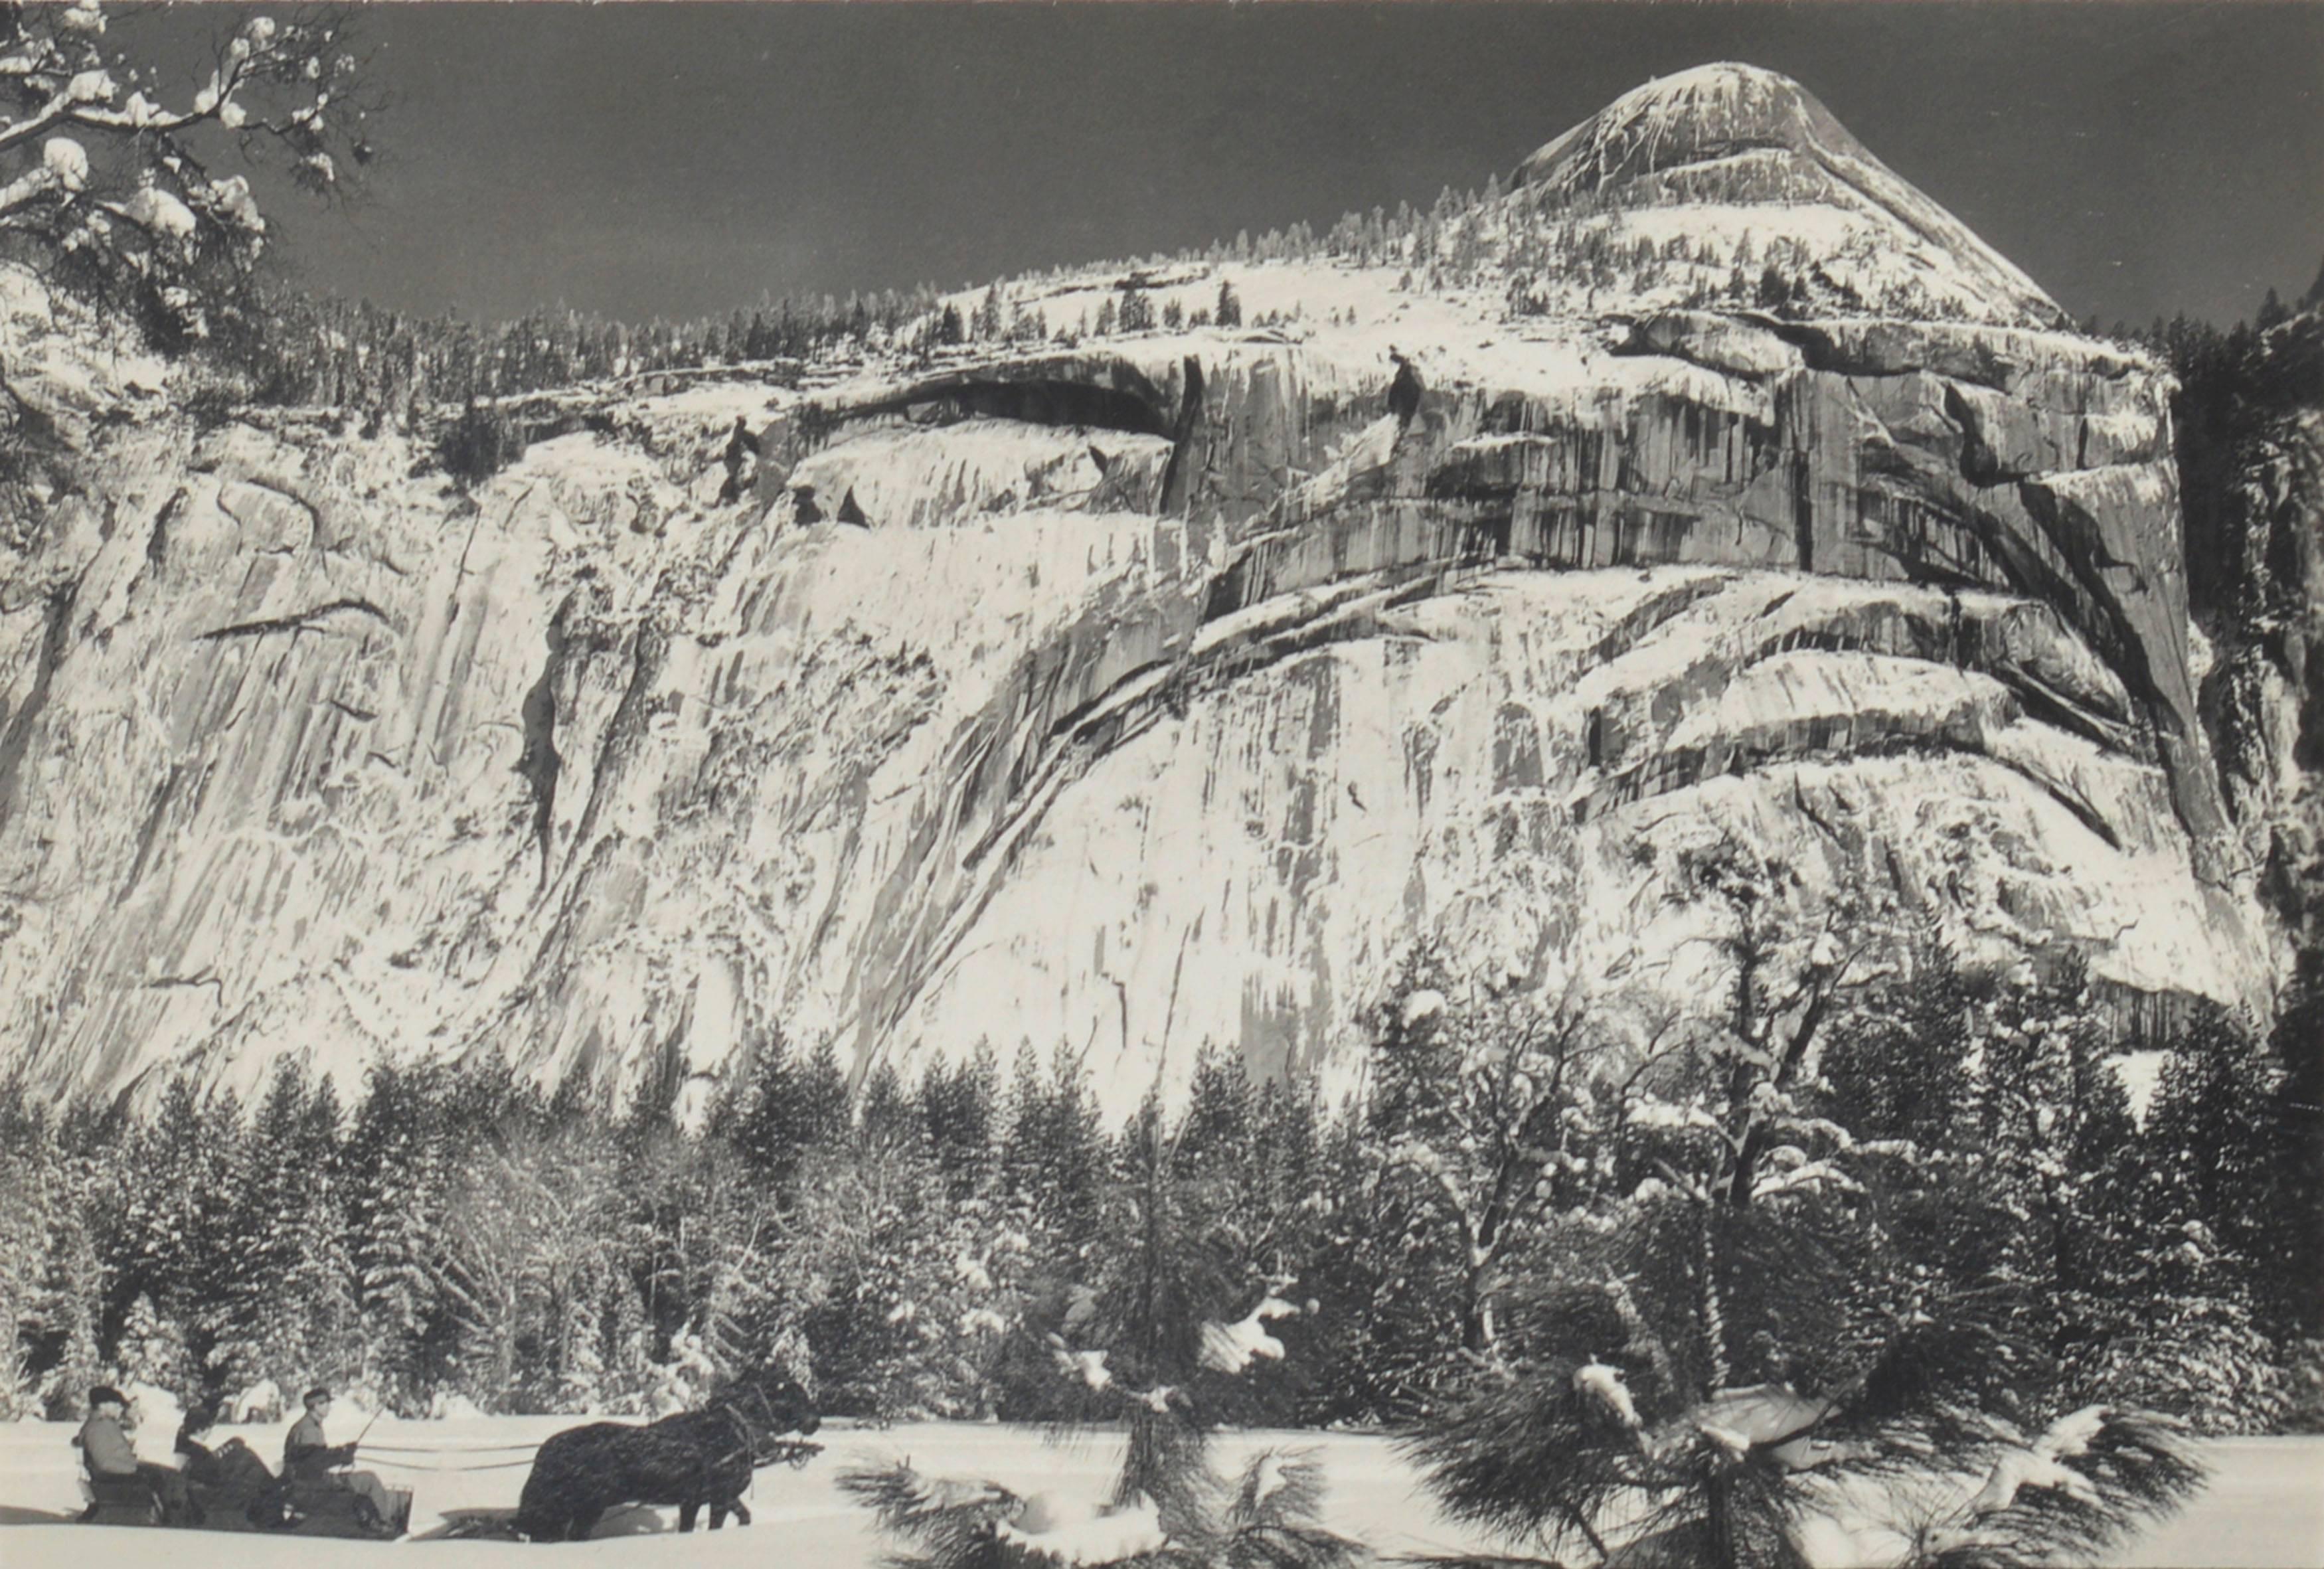 Yosemite Valley Winter and Sleigh Ride, 1938 - Photograph by Ansel Adams